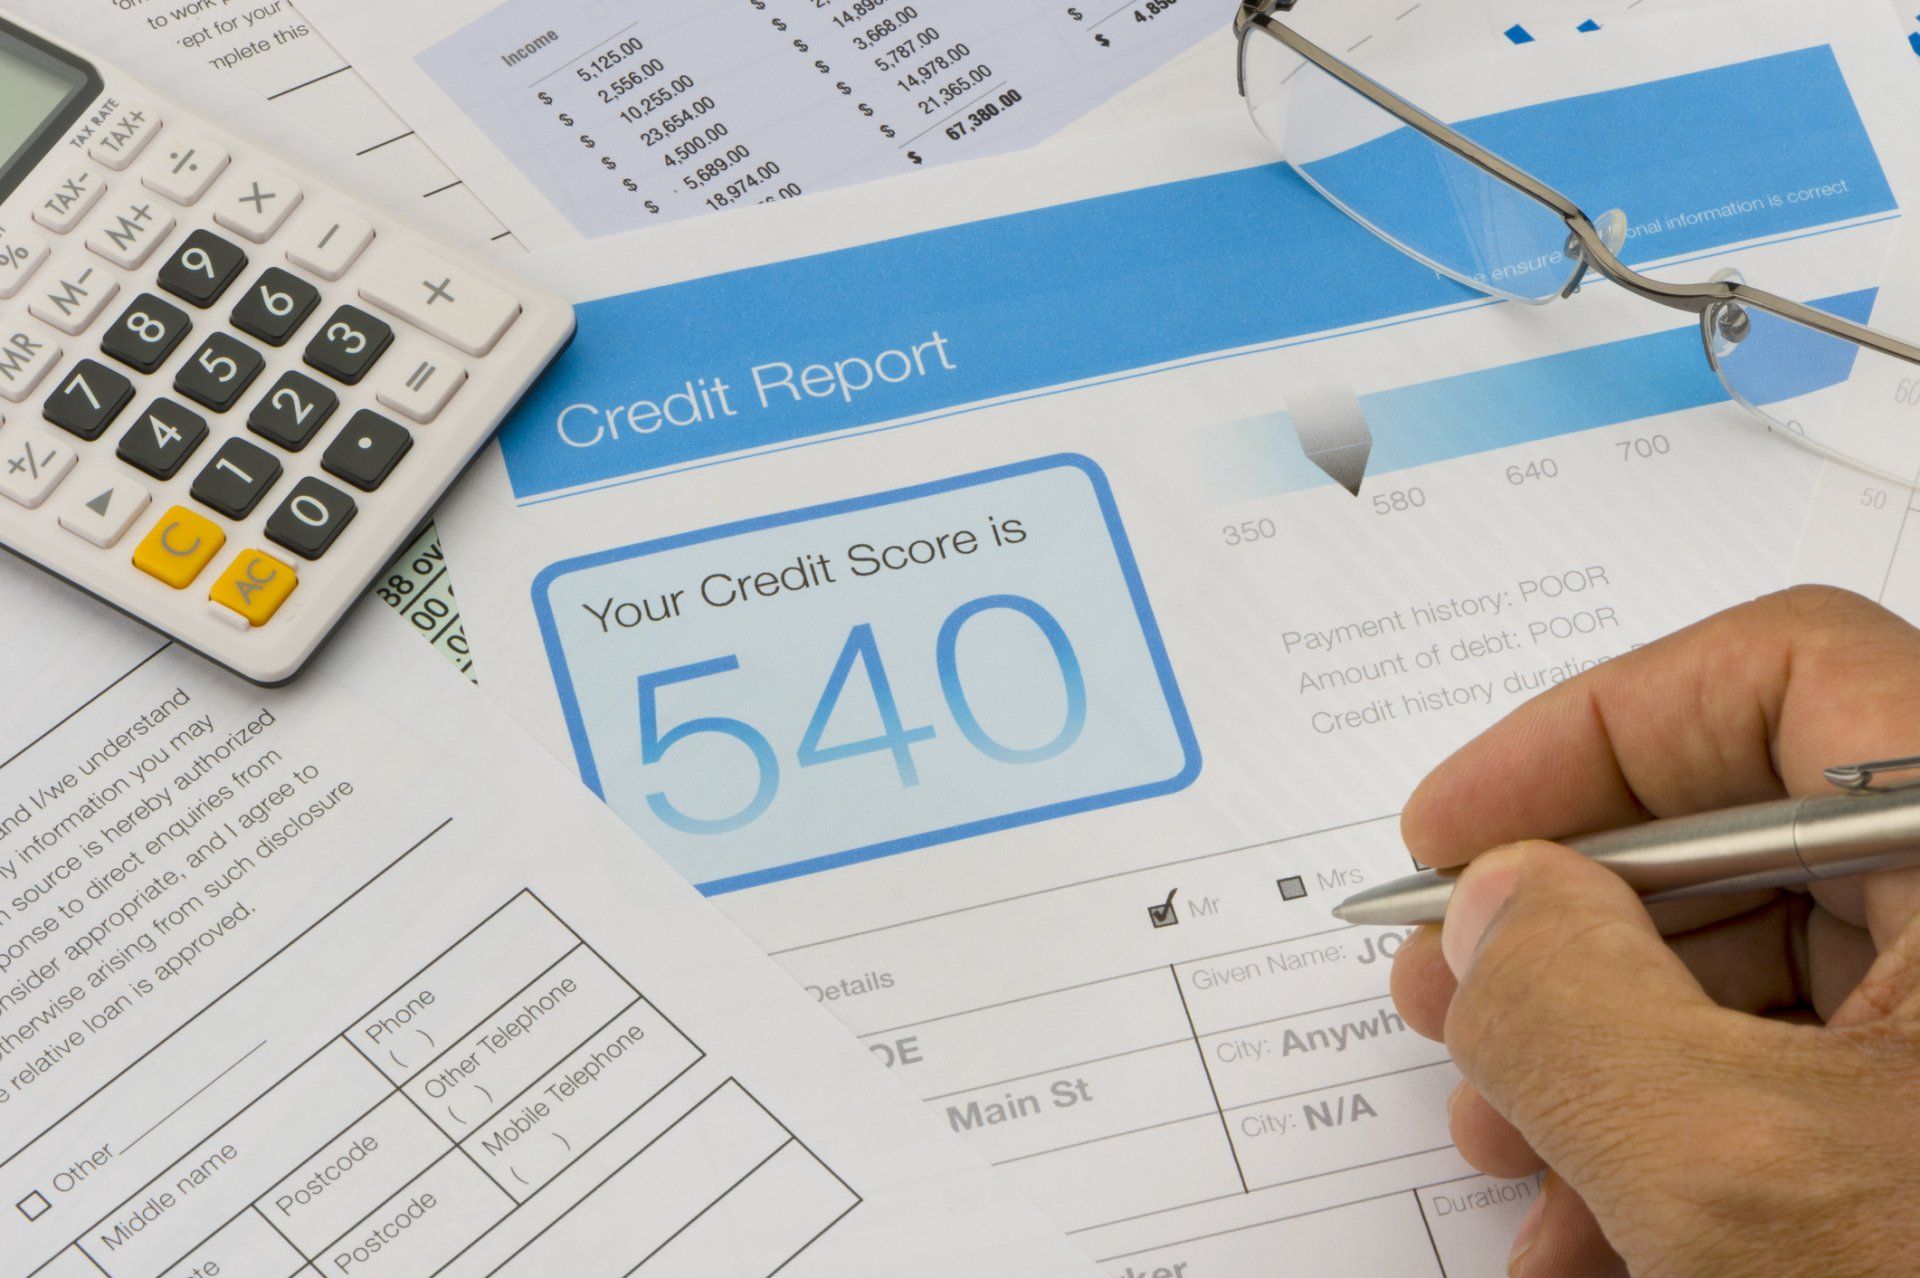 Credit Report Form On A Desk With Other Paperwork - Albuquerque, NM - Credit Rescue Inc.